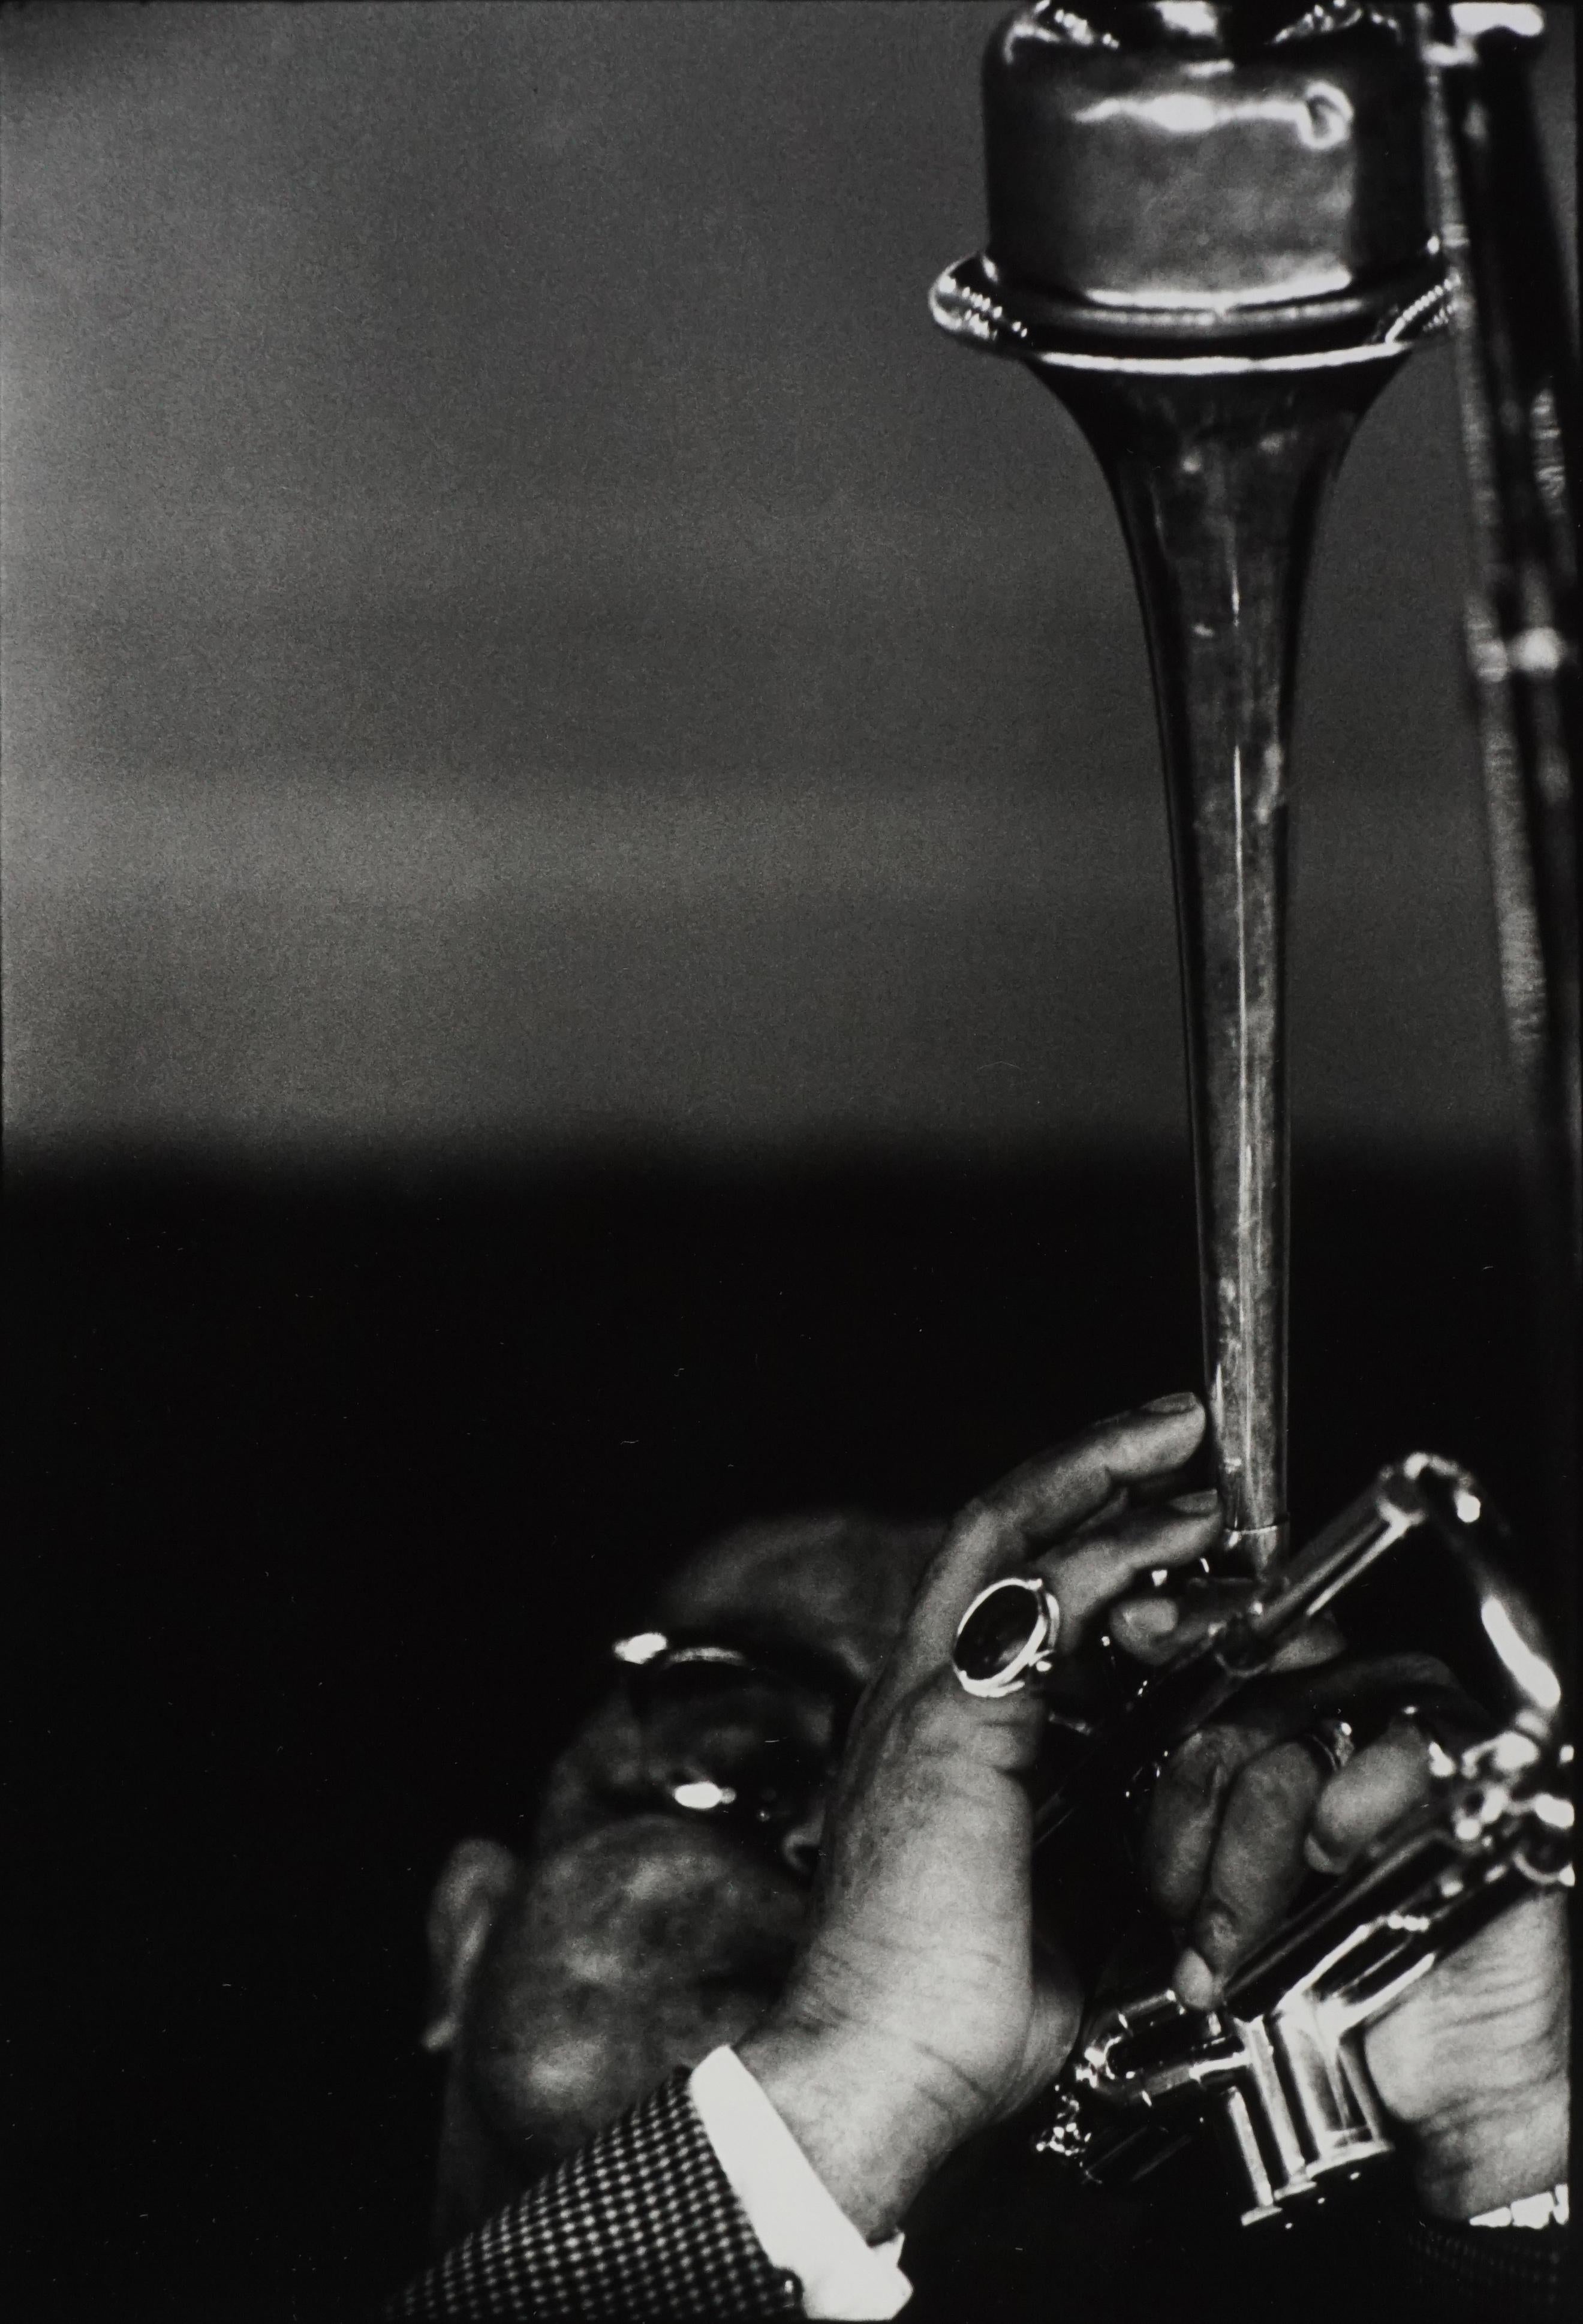 Herb Snitzer Black and White Photograph - Dizzy Gillespie, Performance at Hunter College, New York City, 1959